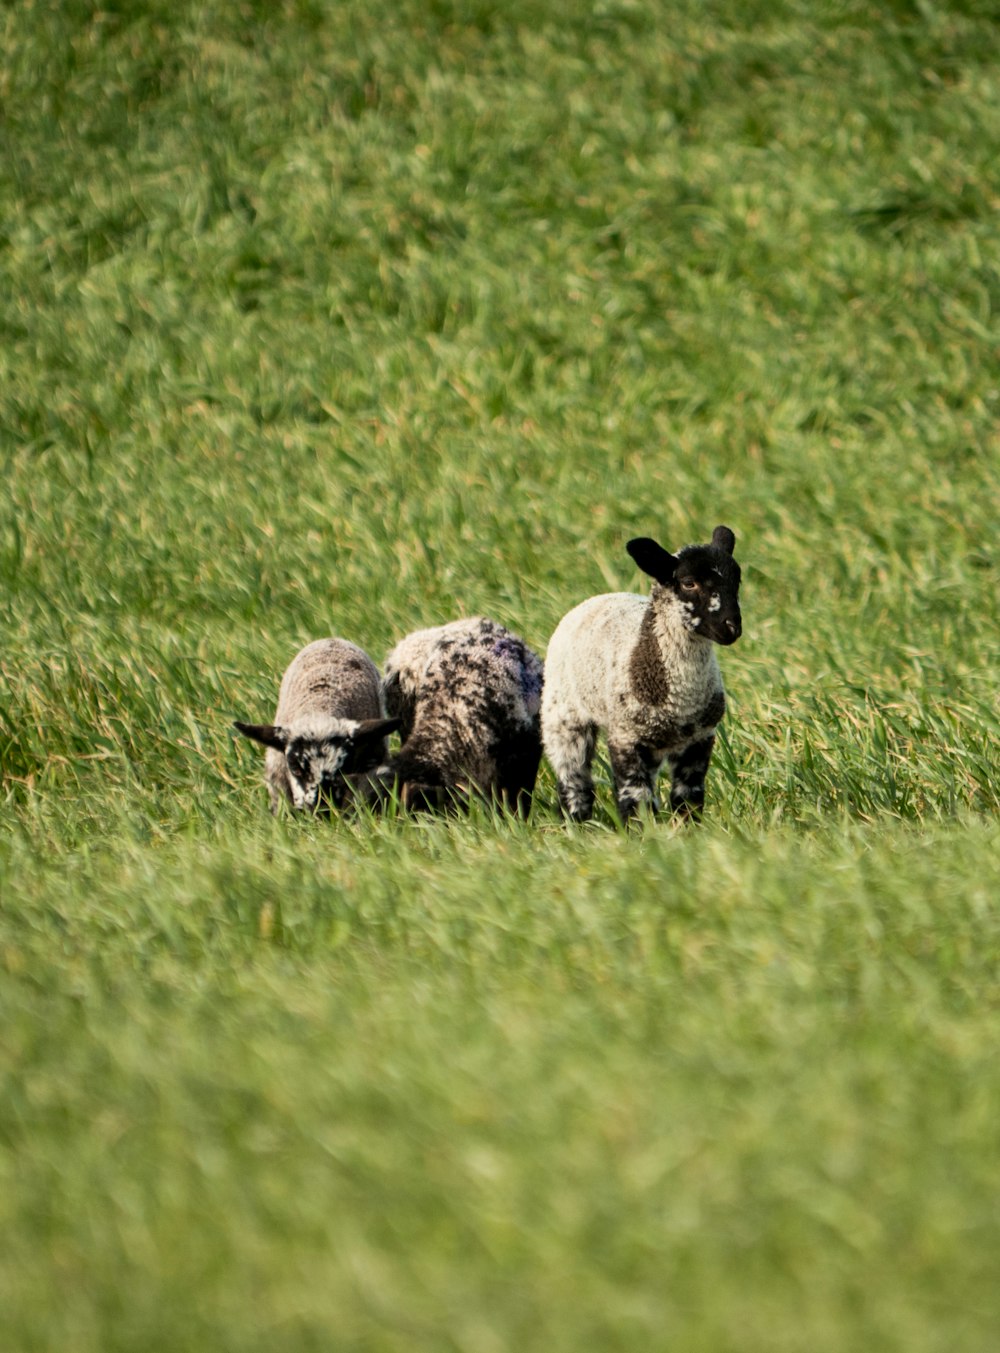 white sheep and gray sheep on green grass field during daytime